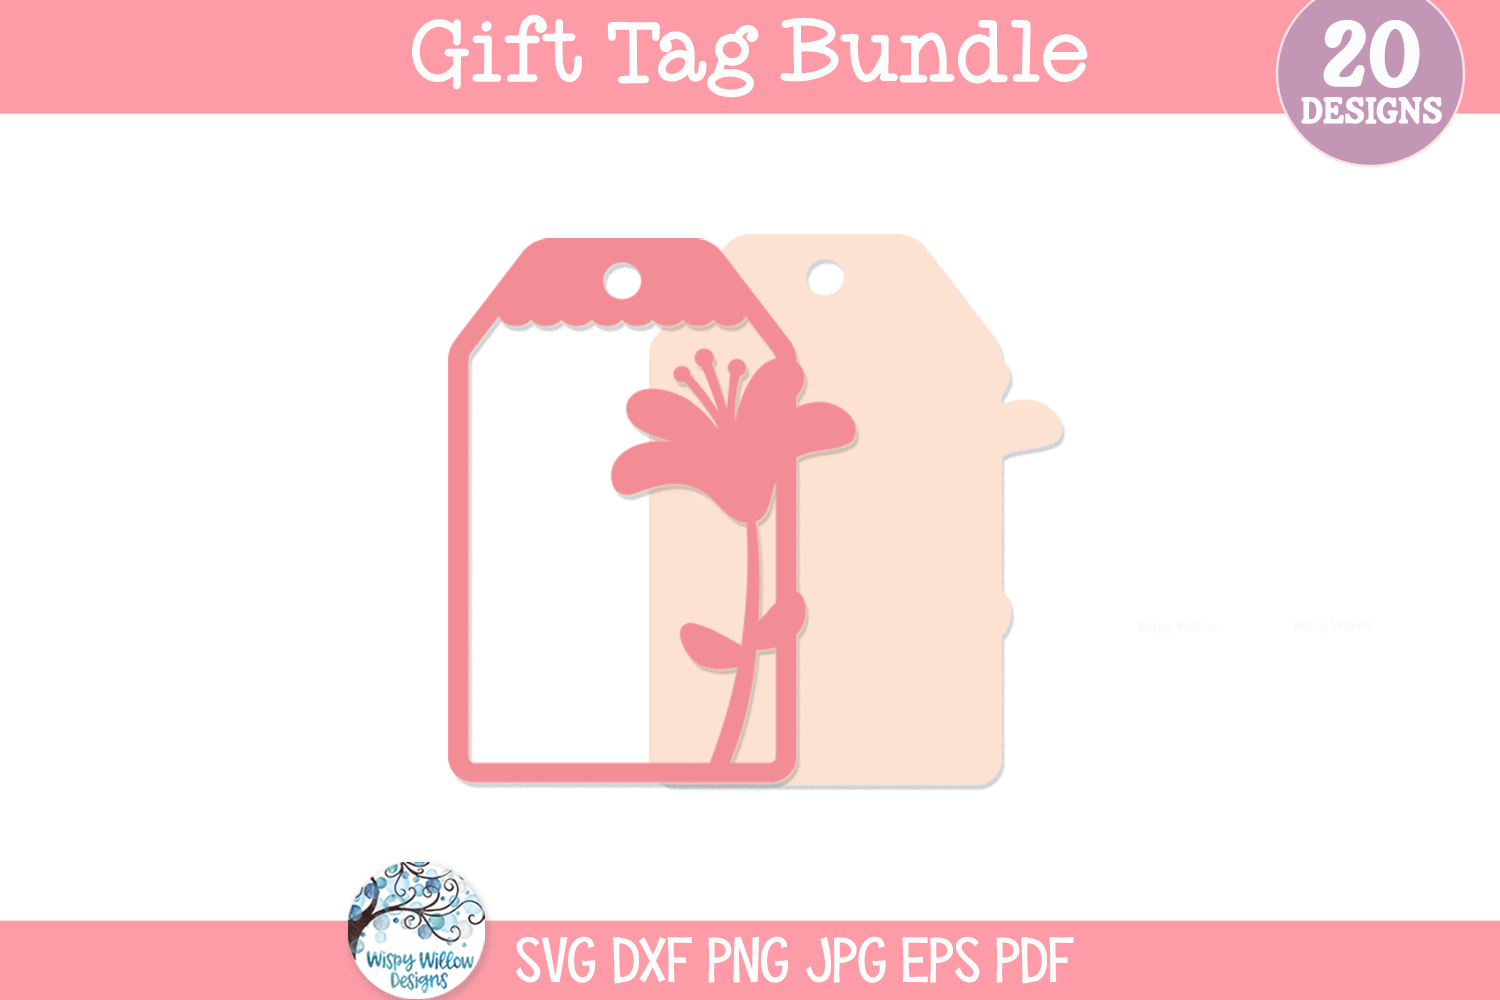 Gift Tag SVG Bundle | Personalized Holiday Tag Designs Wispy Willow Designs Company